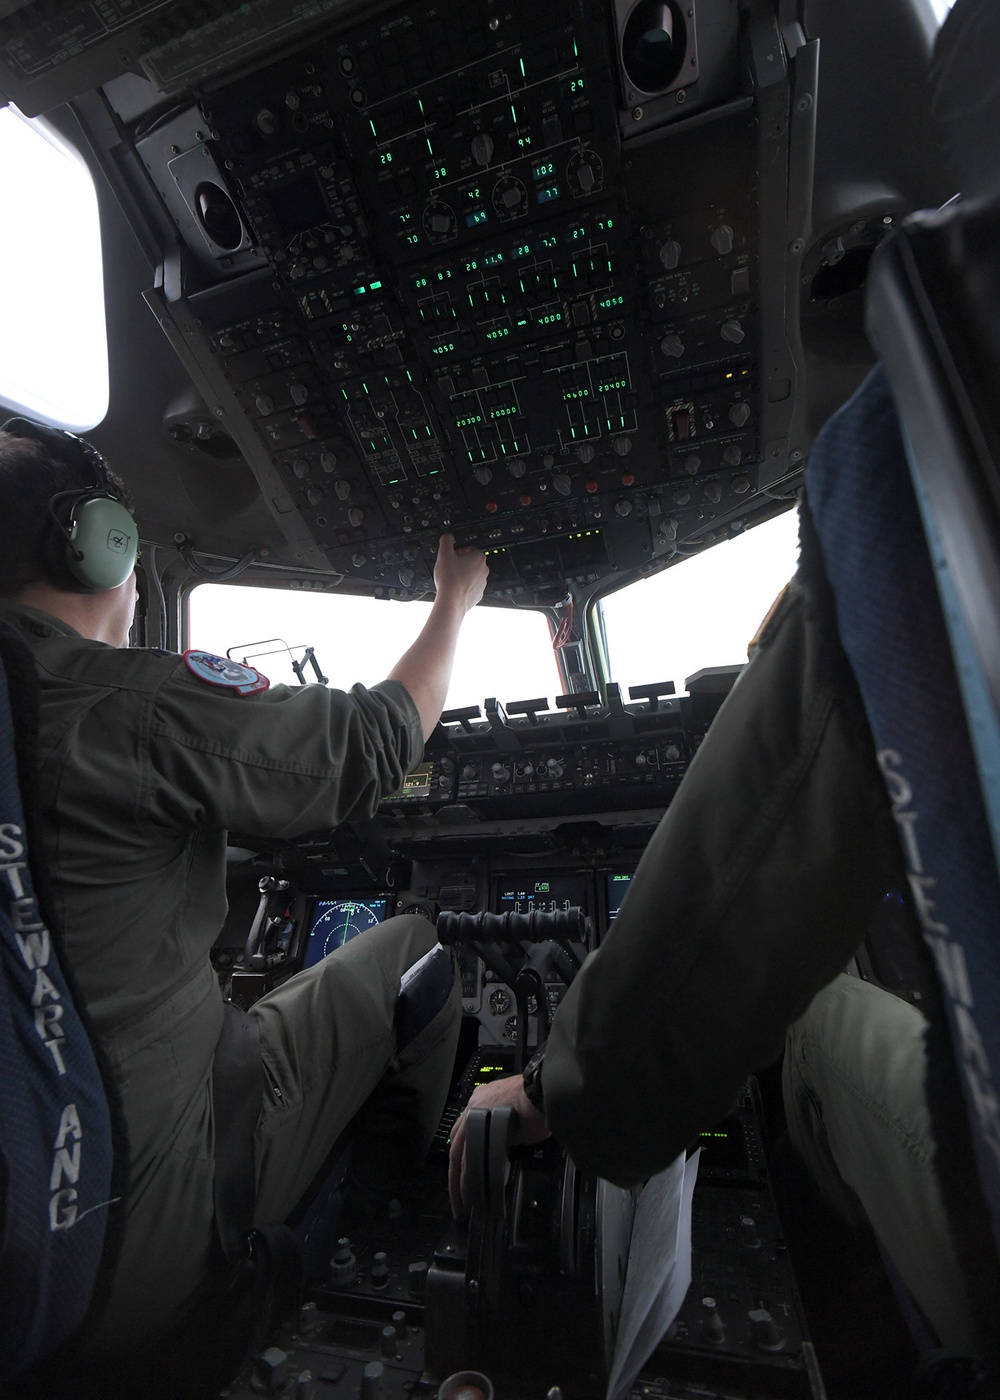 The 105th Airlift Wing and the 158th Fighter Wing Conduct Air Guard Wing-Level Exercise